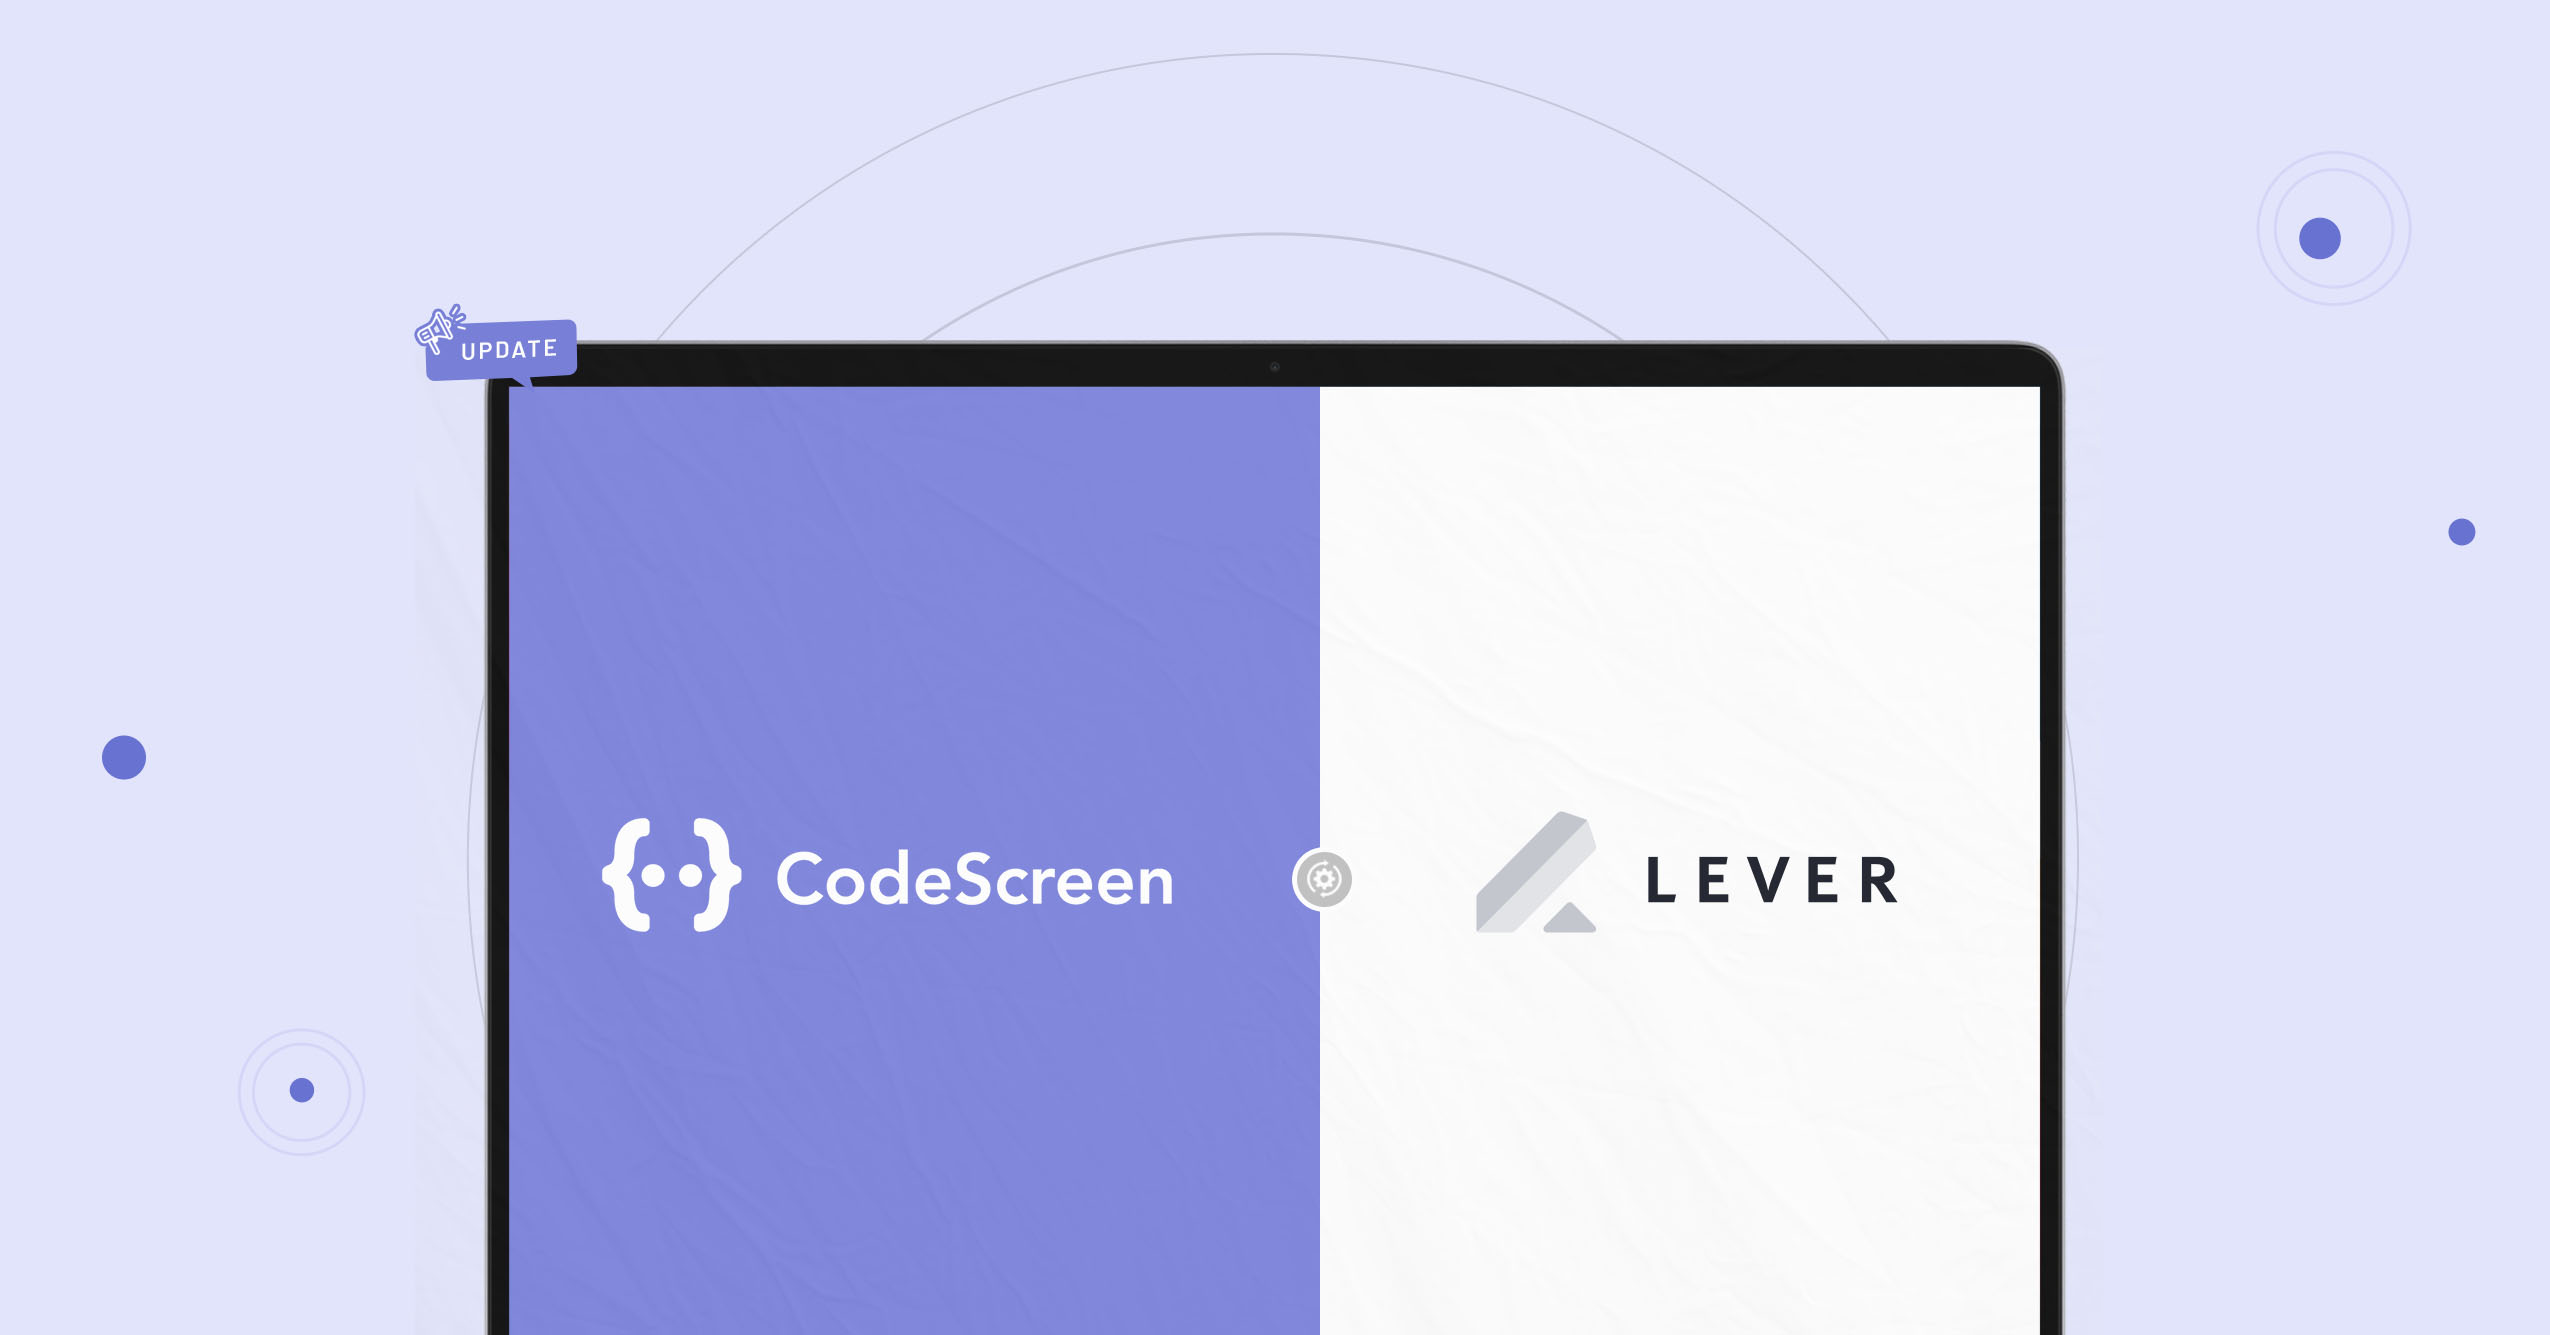 CodeScreen now integrates with Lever